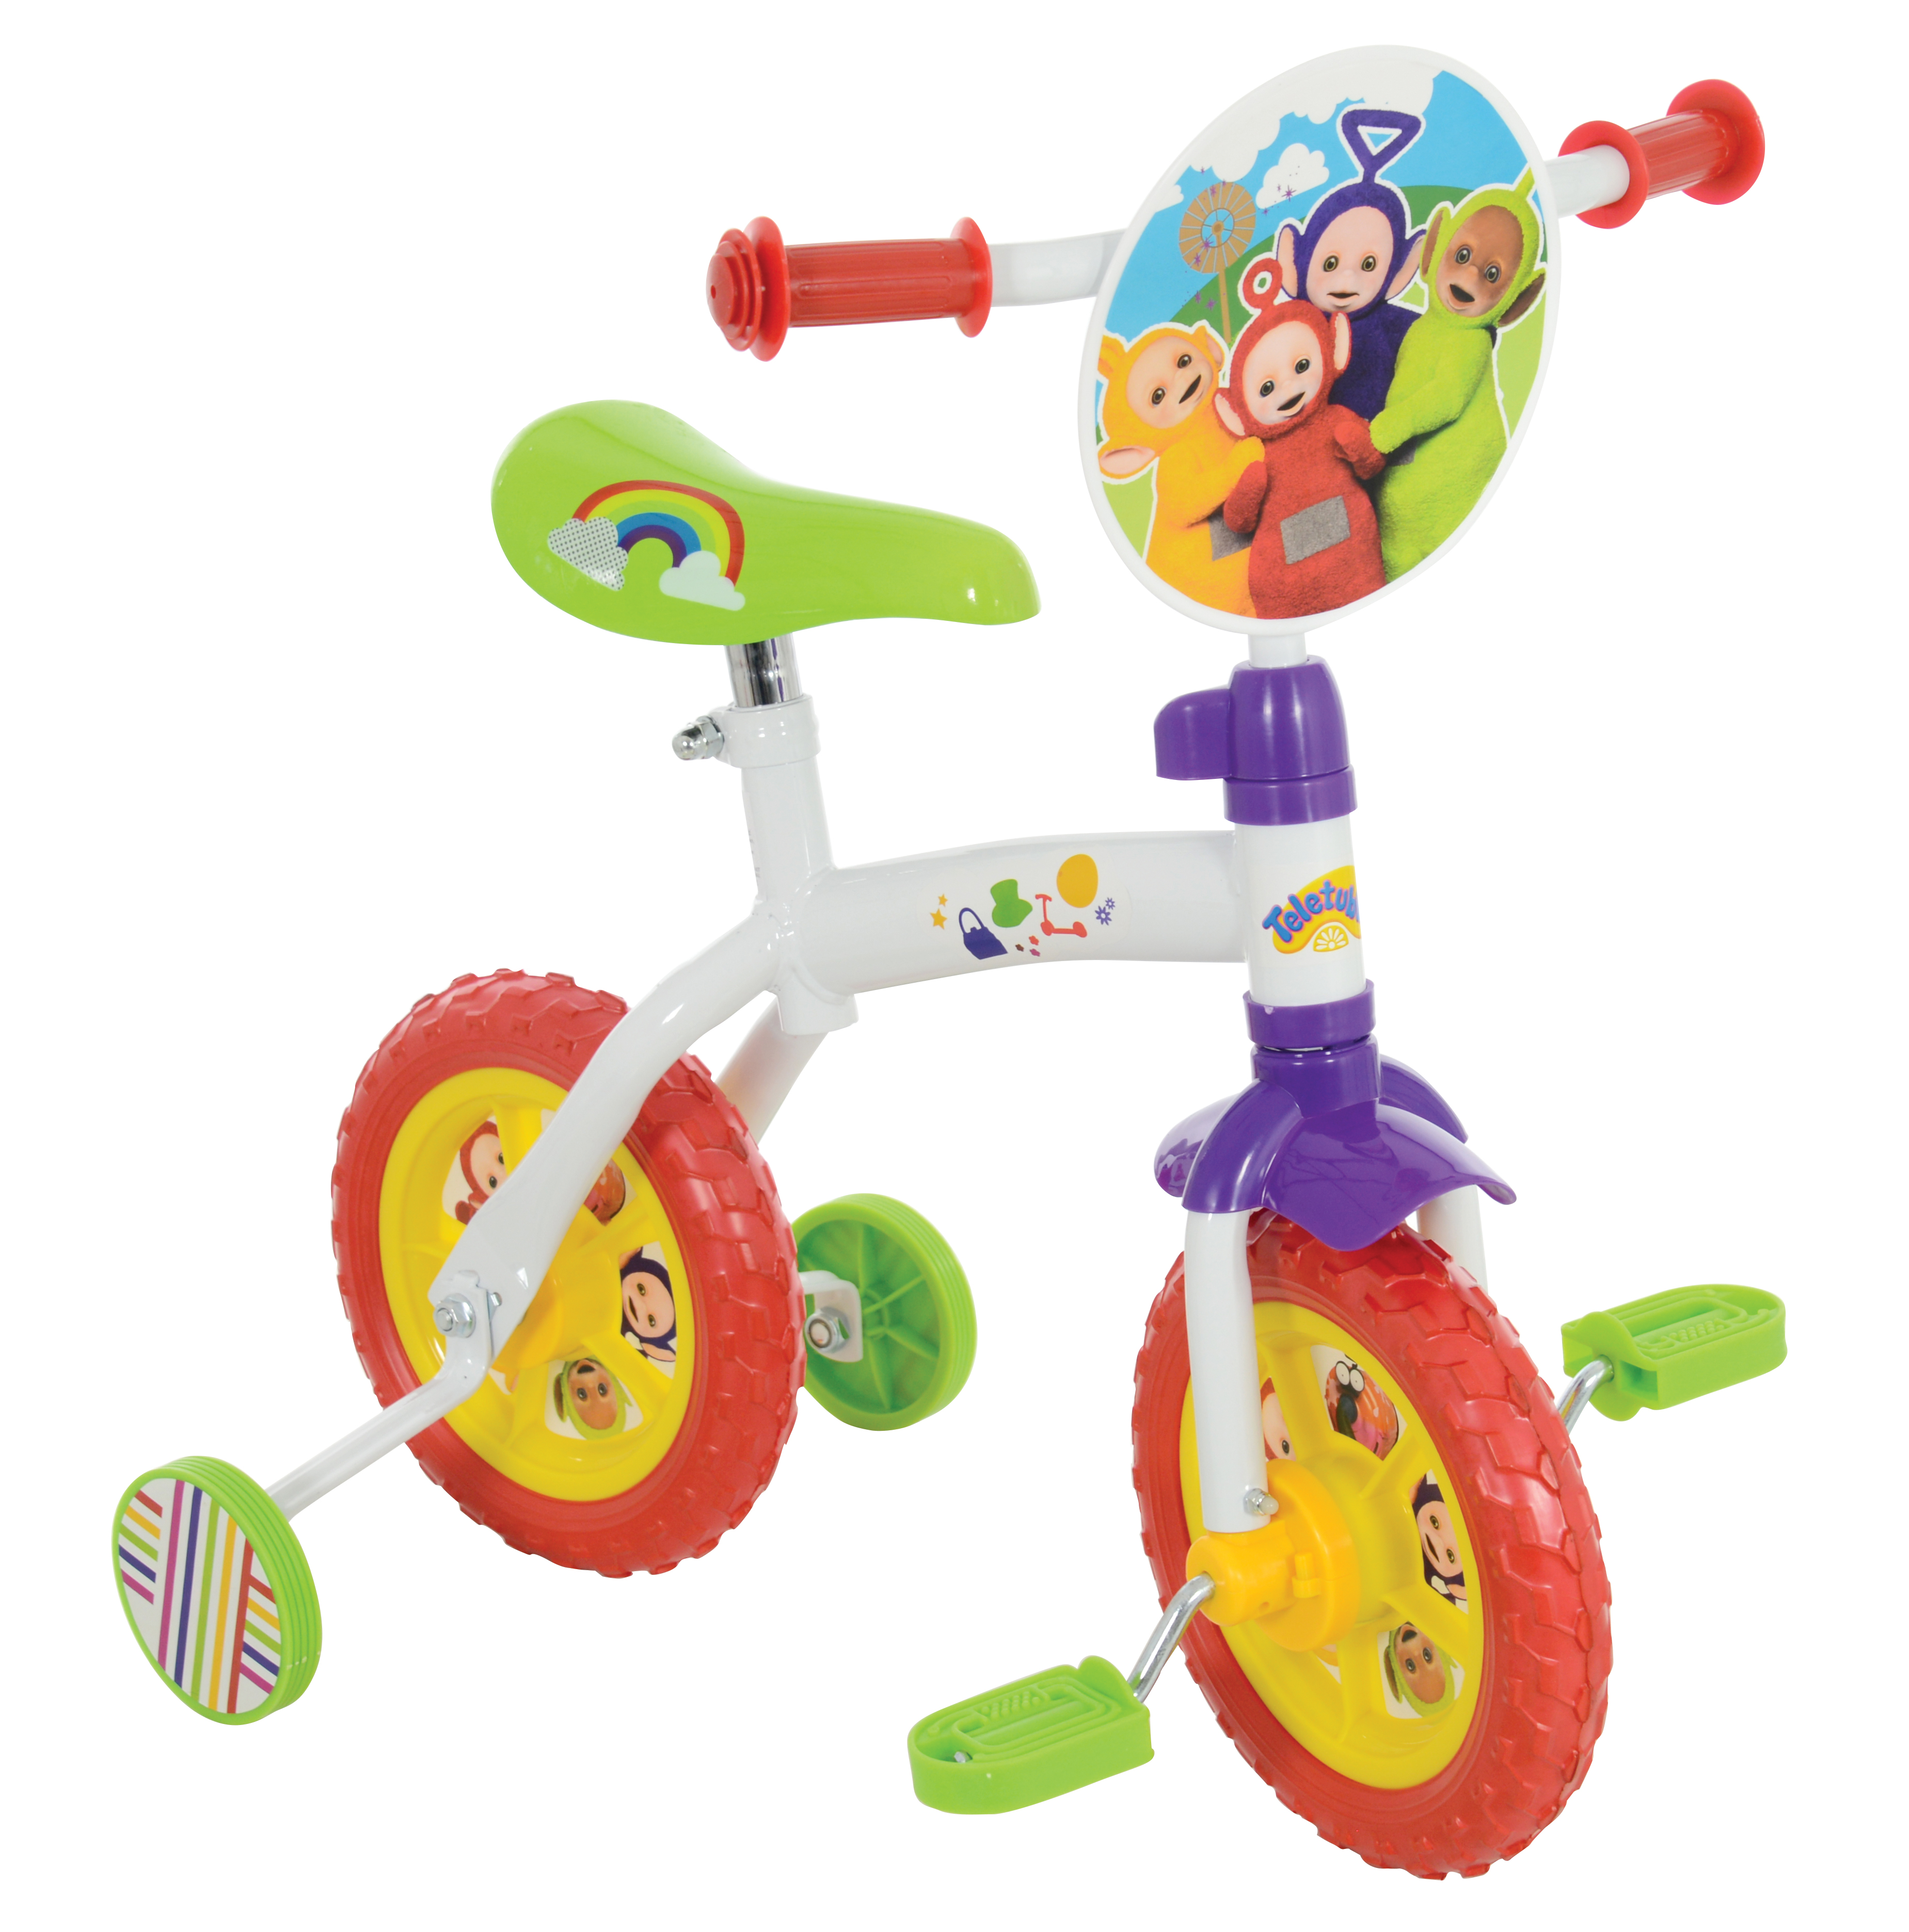 Scoot along like Po with the Teletubbies outdoors play range